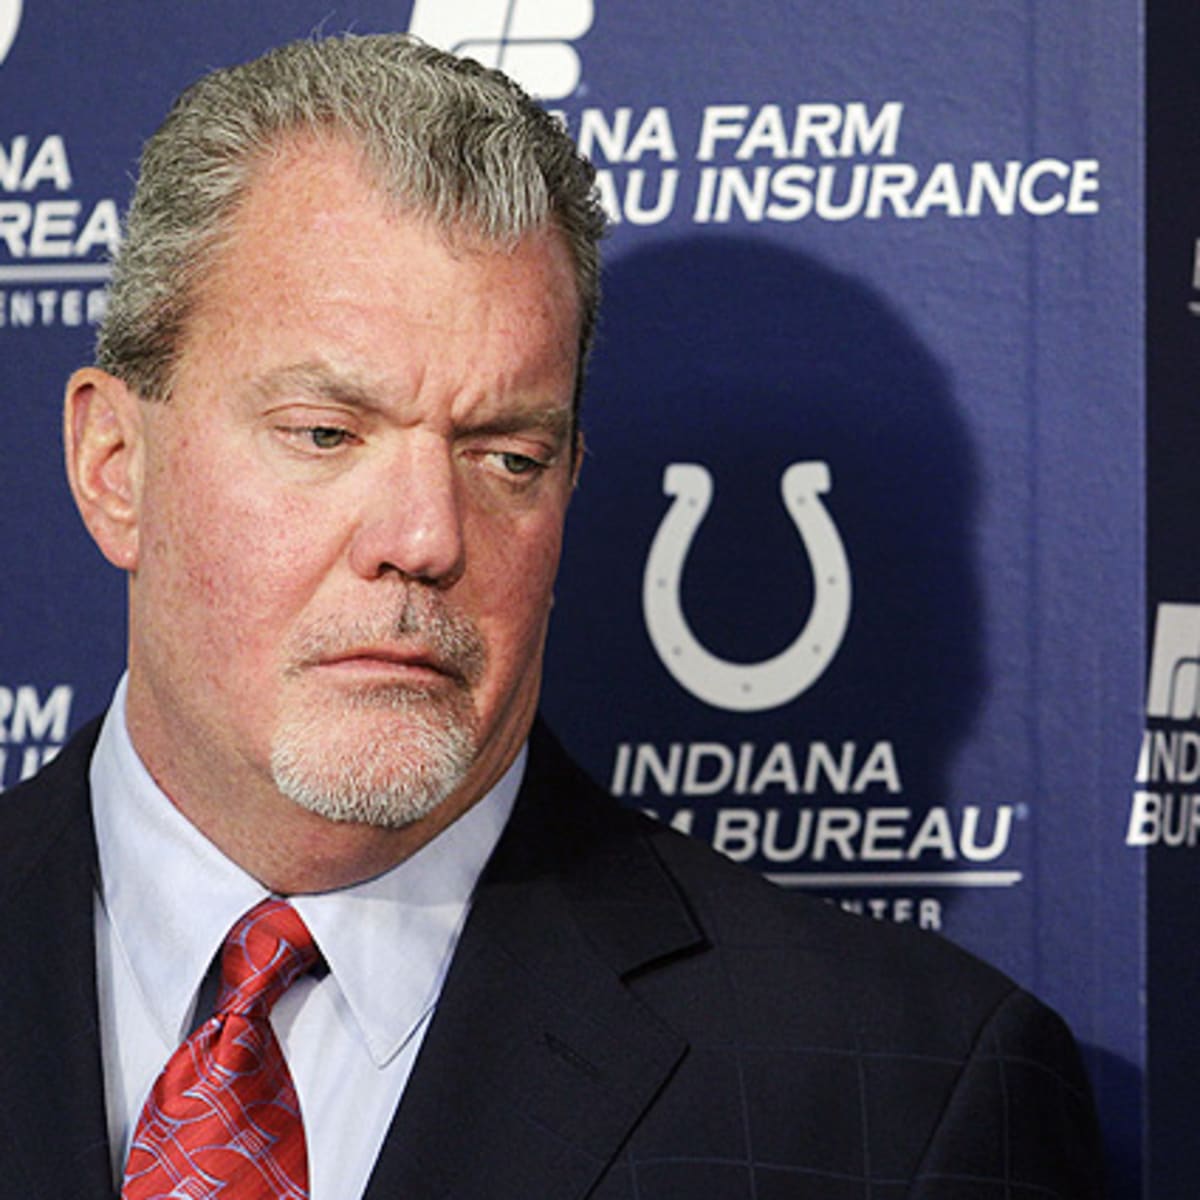 Jim Irsay's refusal to apologize a disservice to Indianapolis